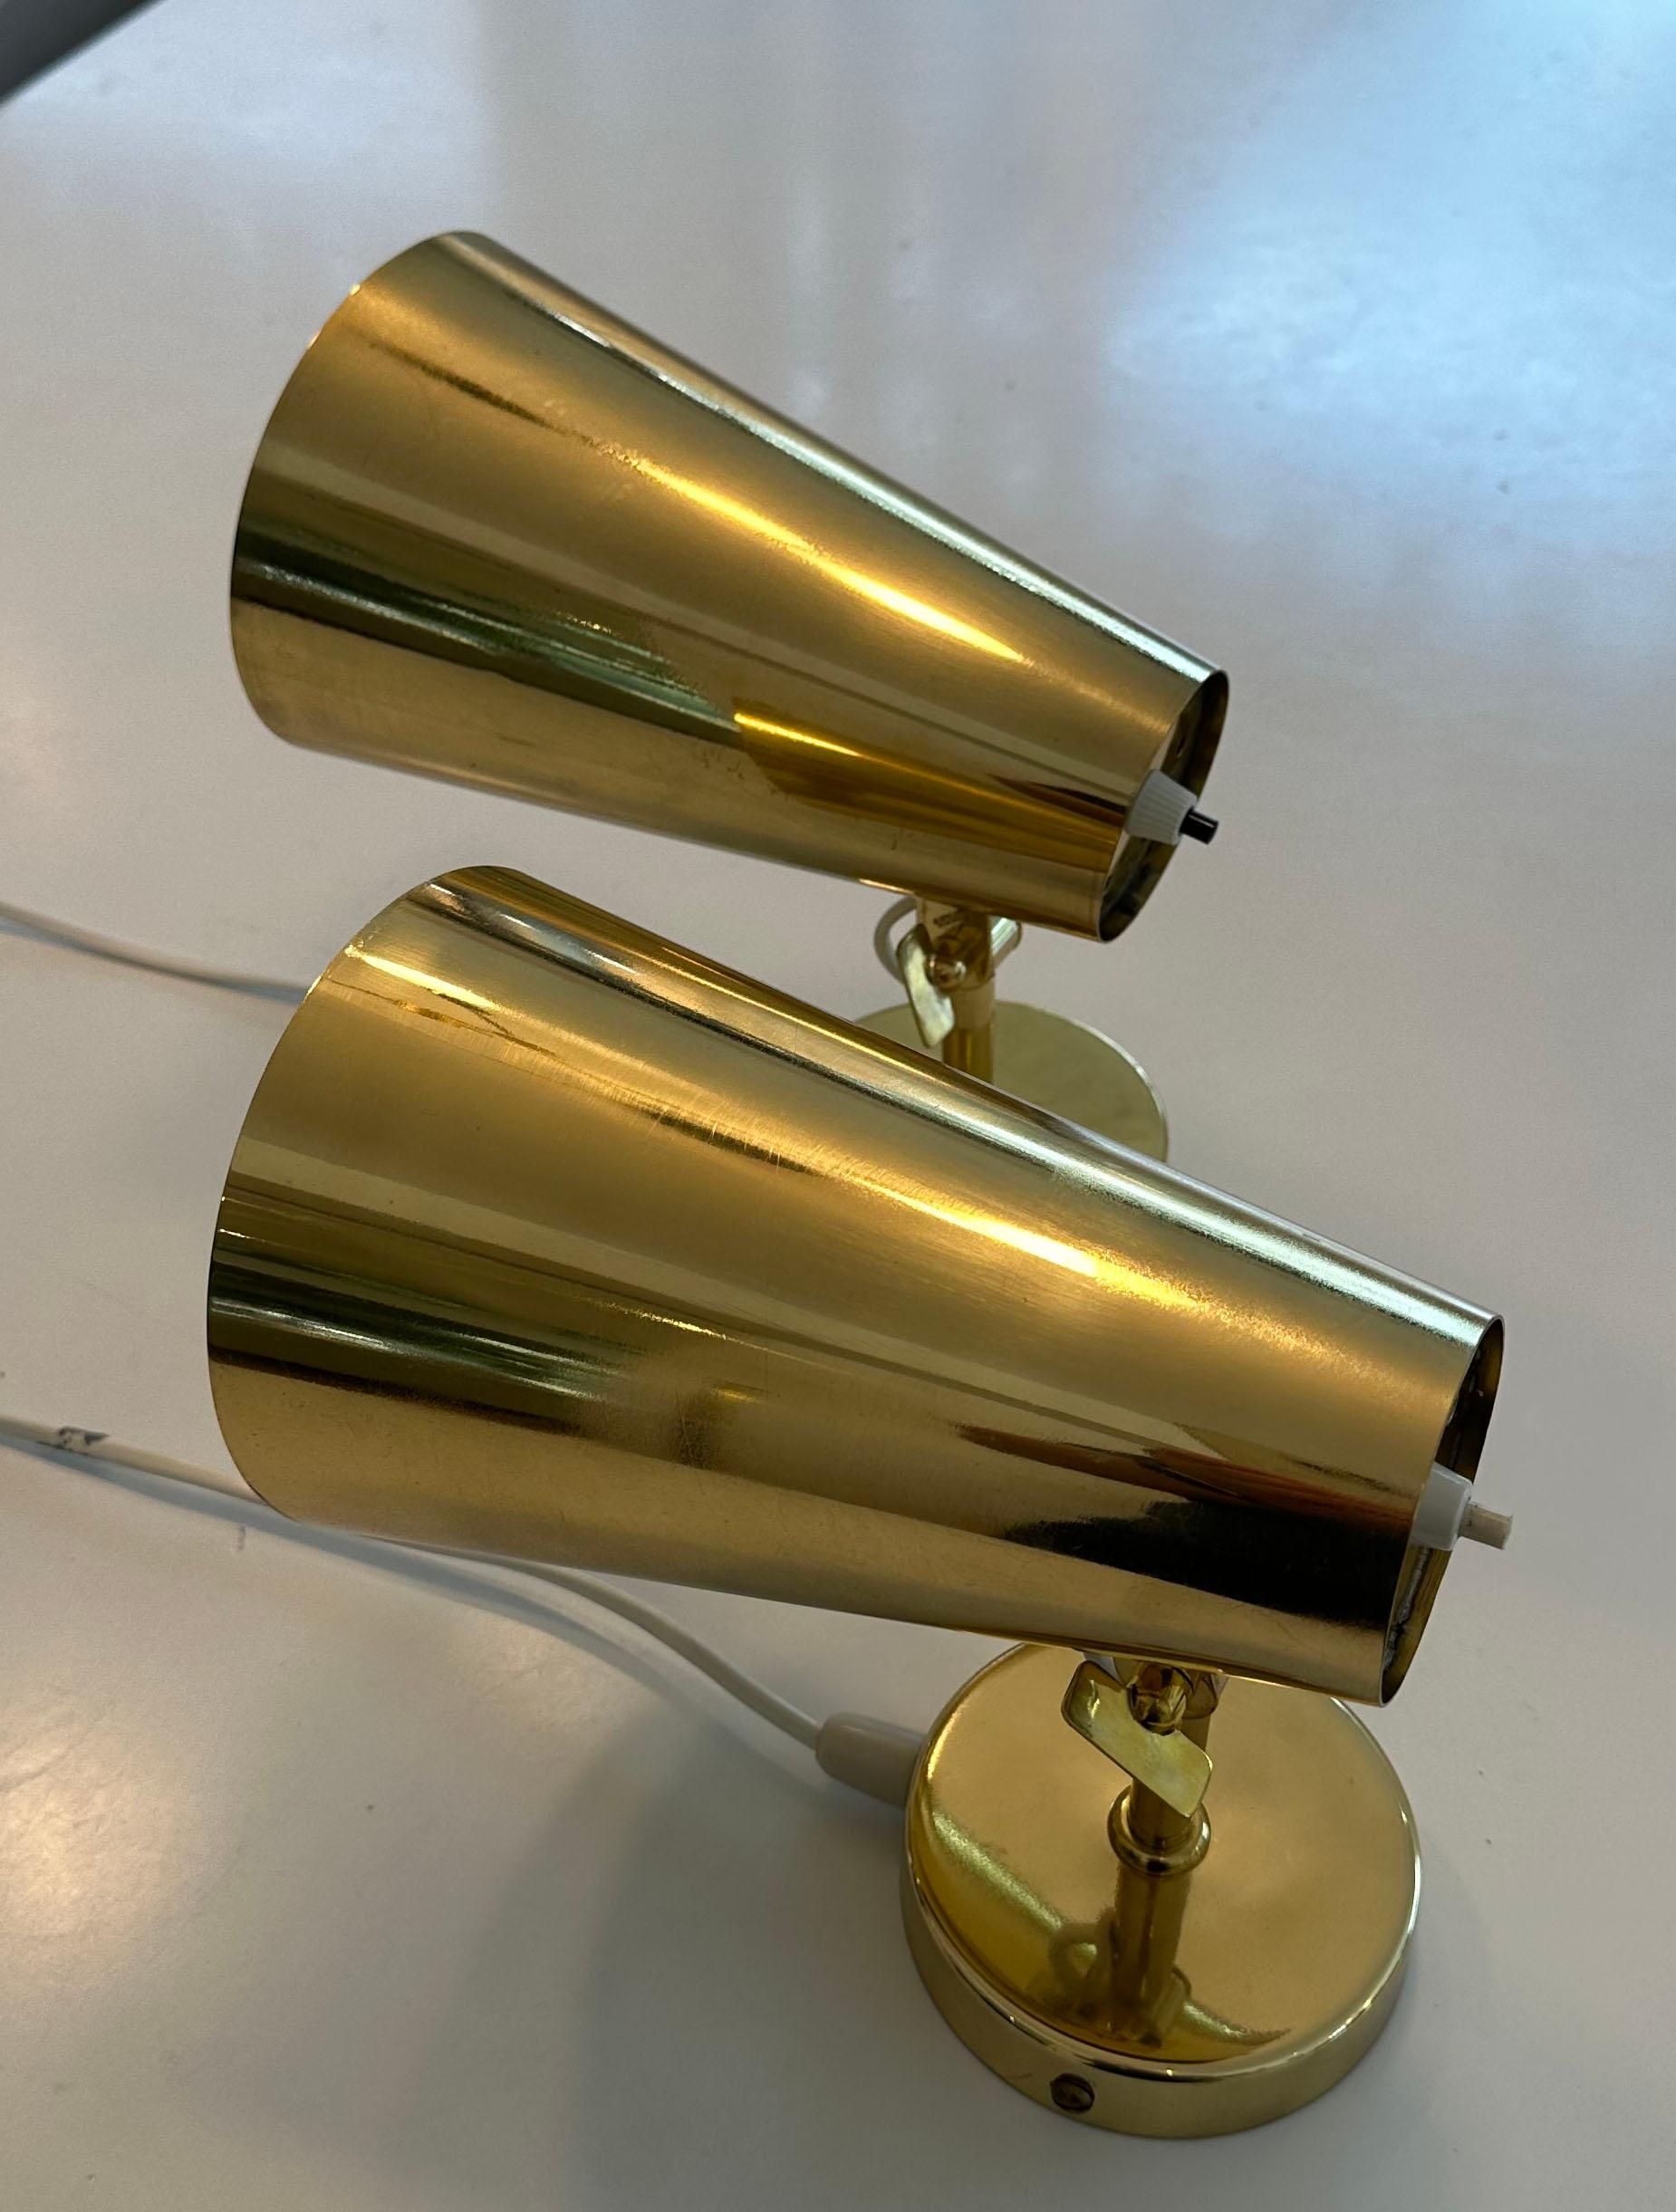 Set of 2 solid brass wall lamps by Paavo Tynell.
Manufactured by Idman in Finland in the 1950s
Marked accordingly